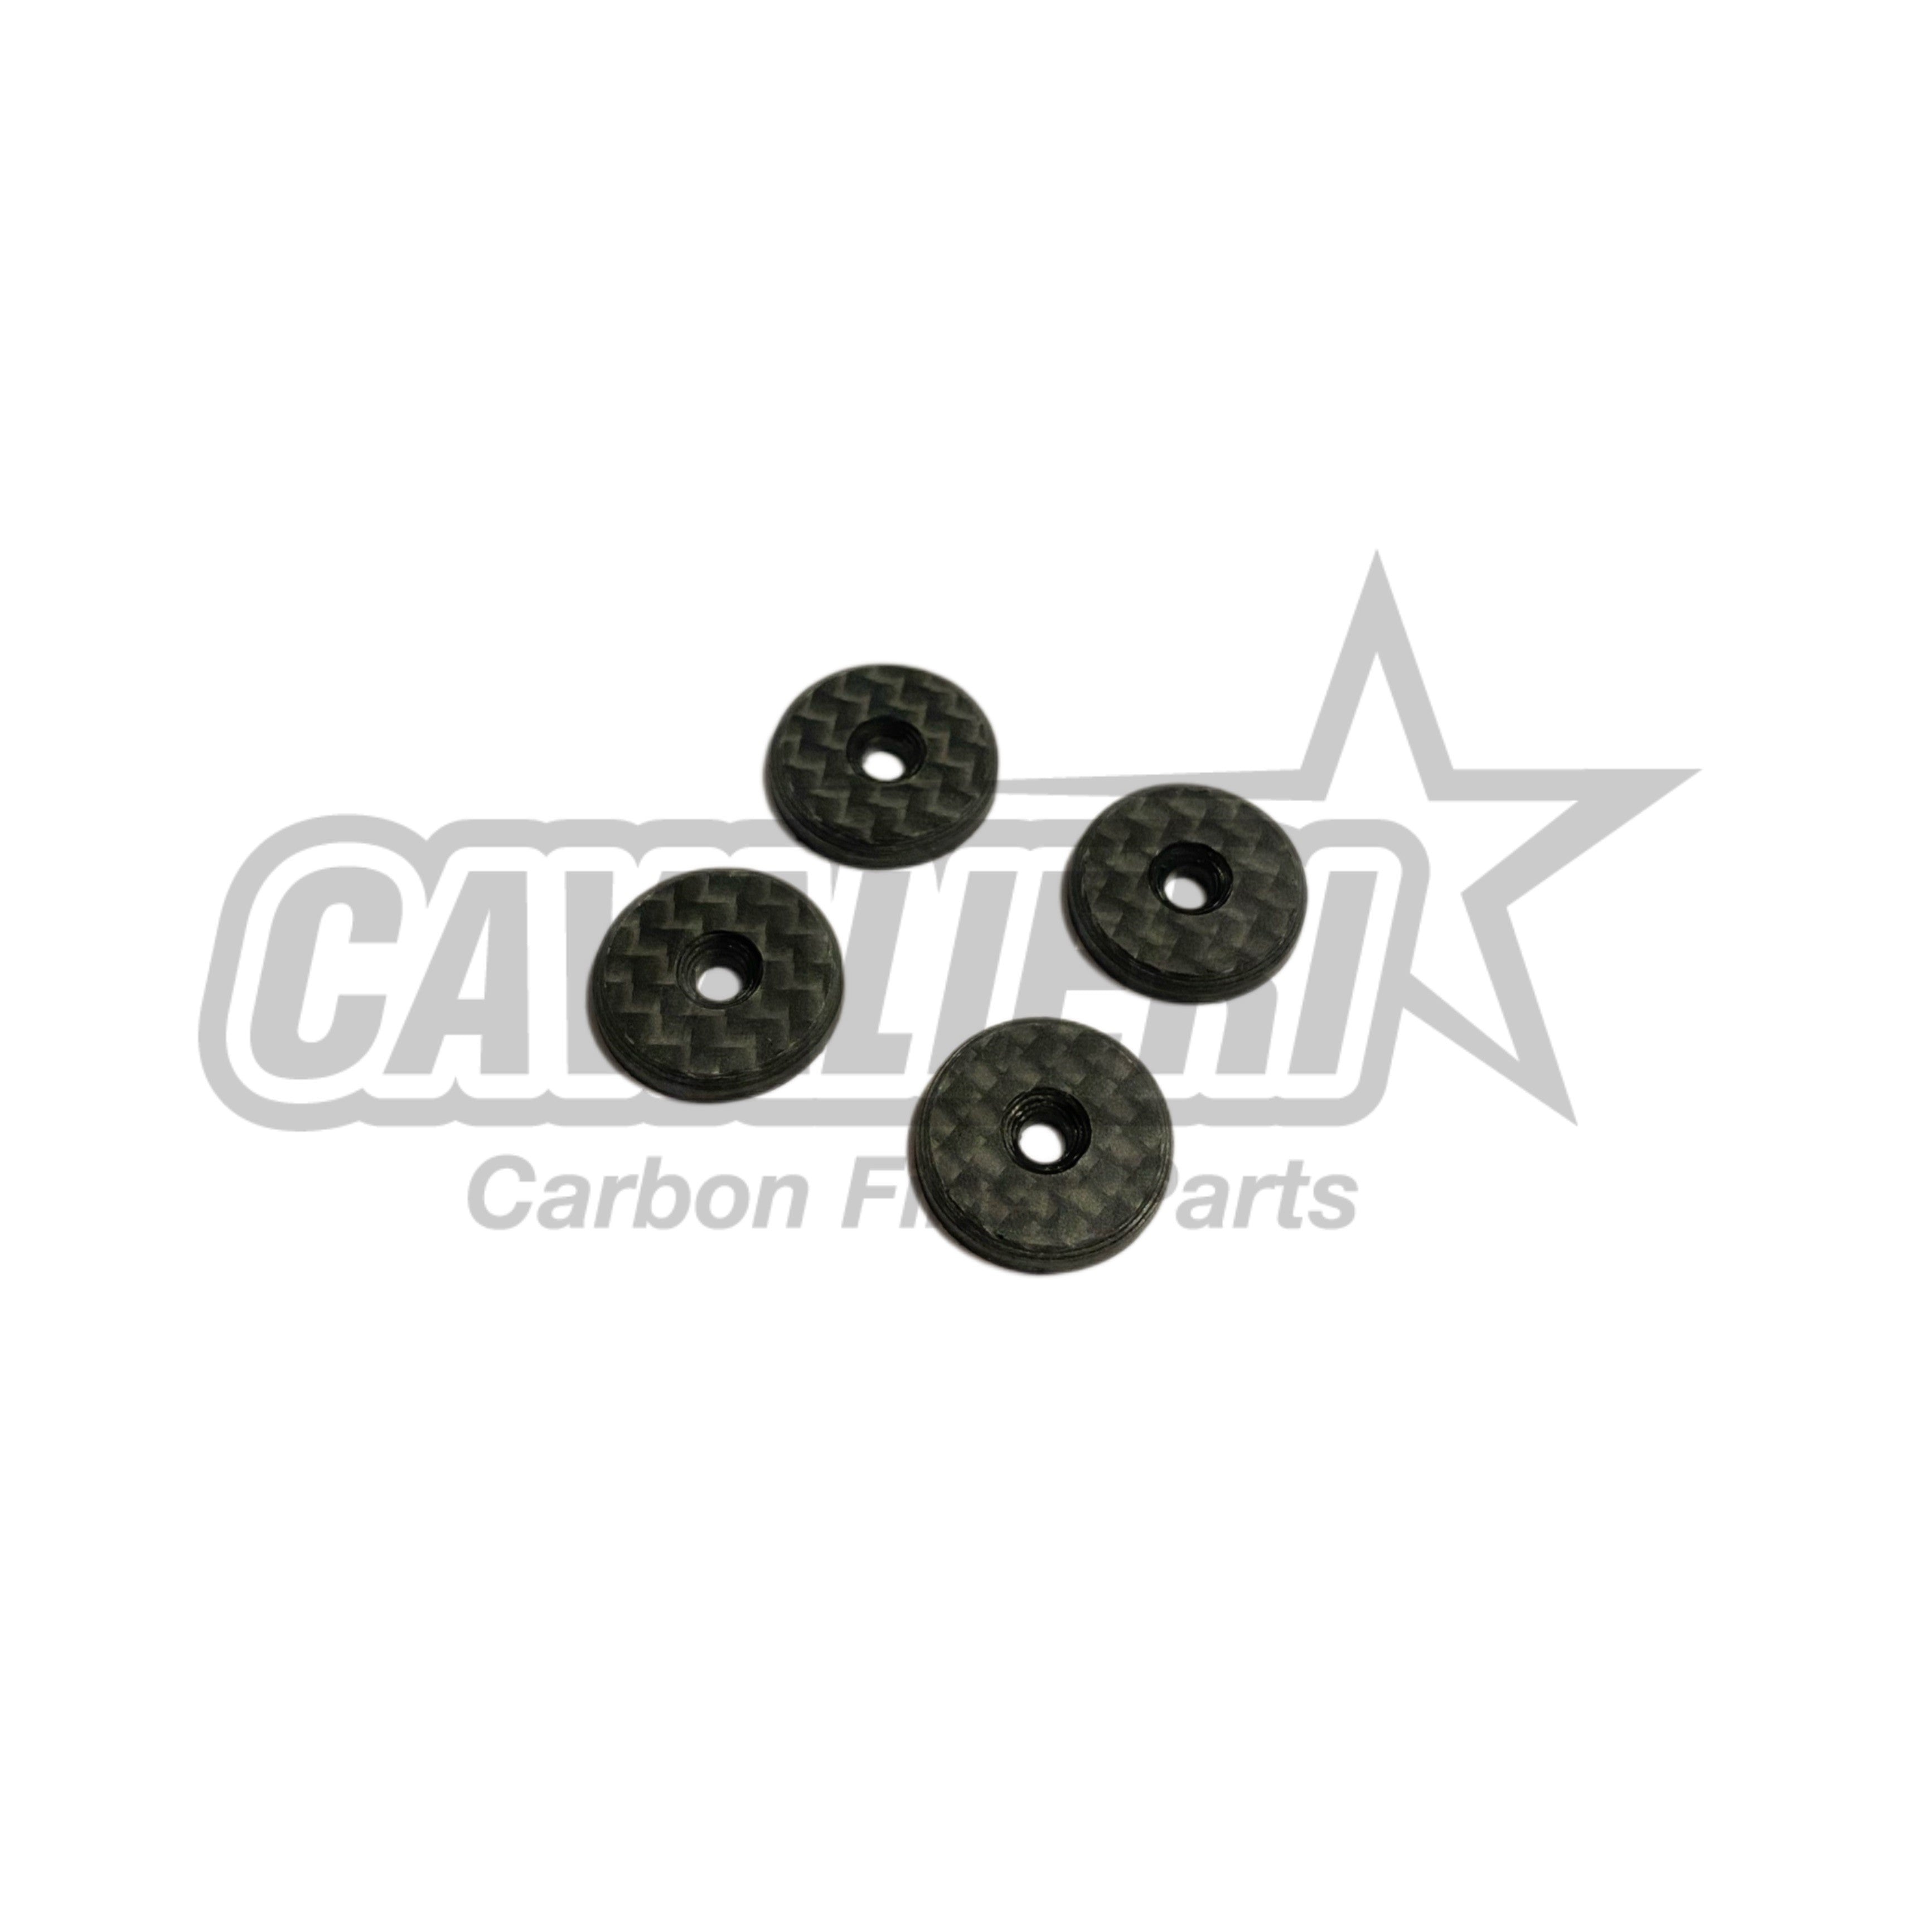 Carbon Fiber Wing Washer Kit 4 Pieces